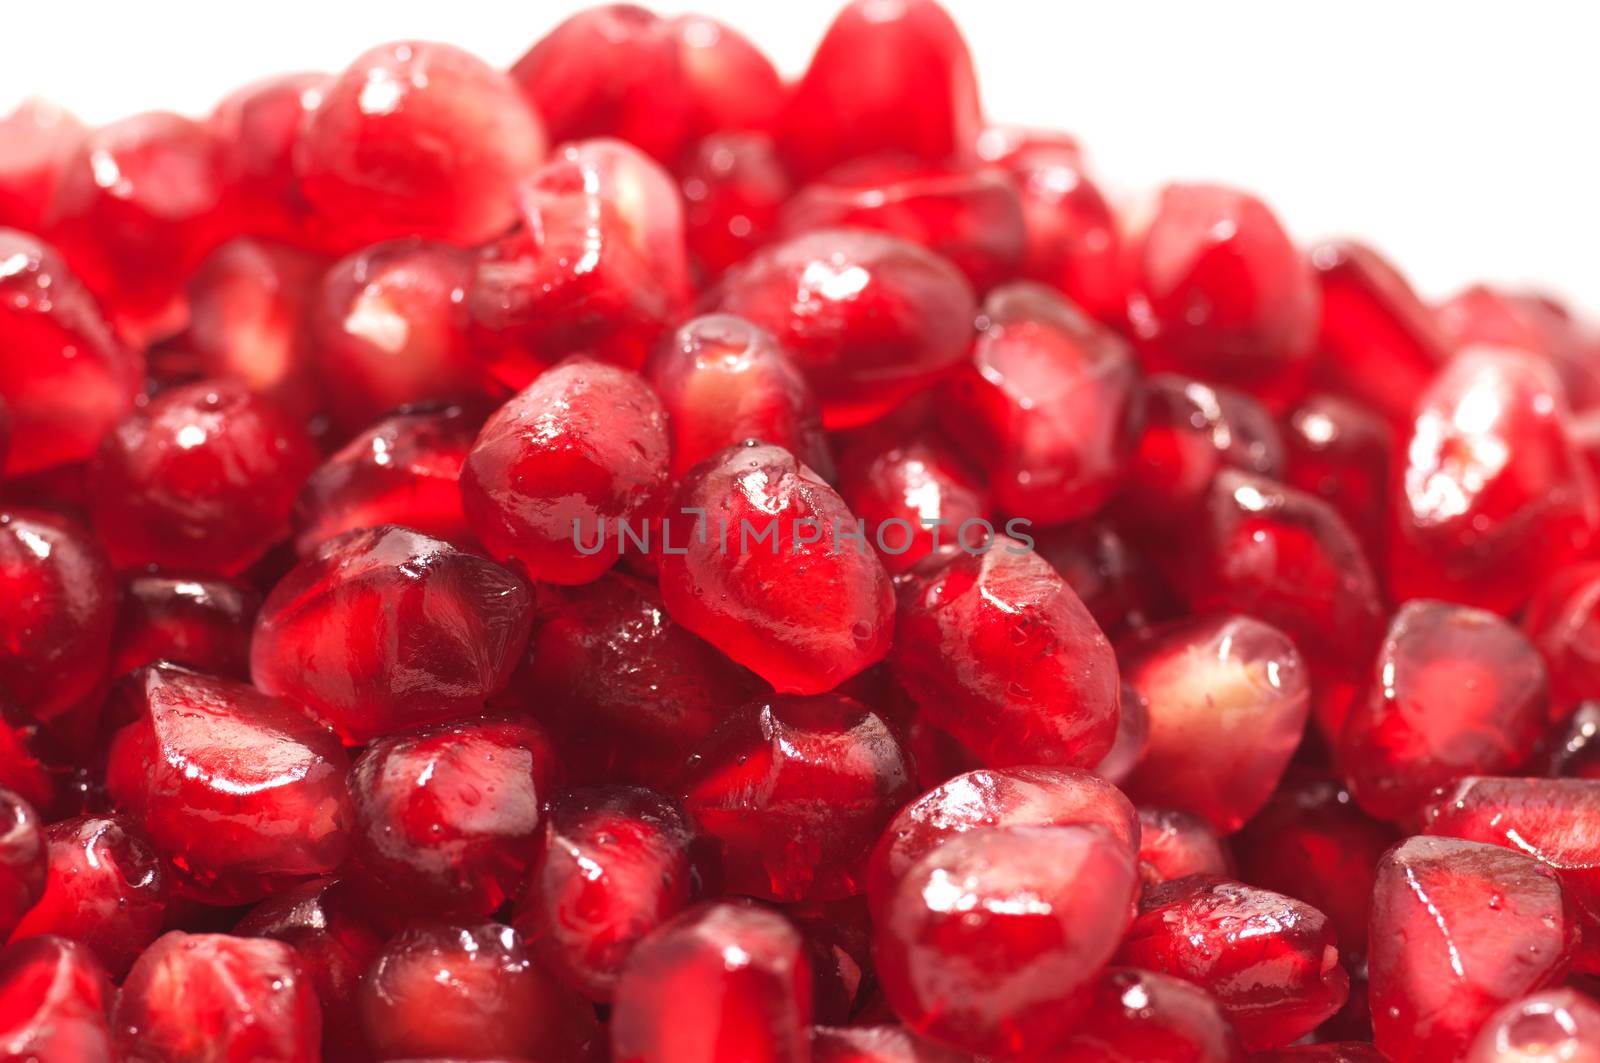 Pomegranate seeds close-up with frost